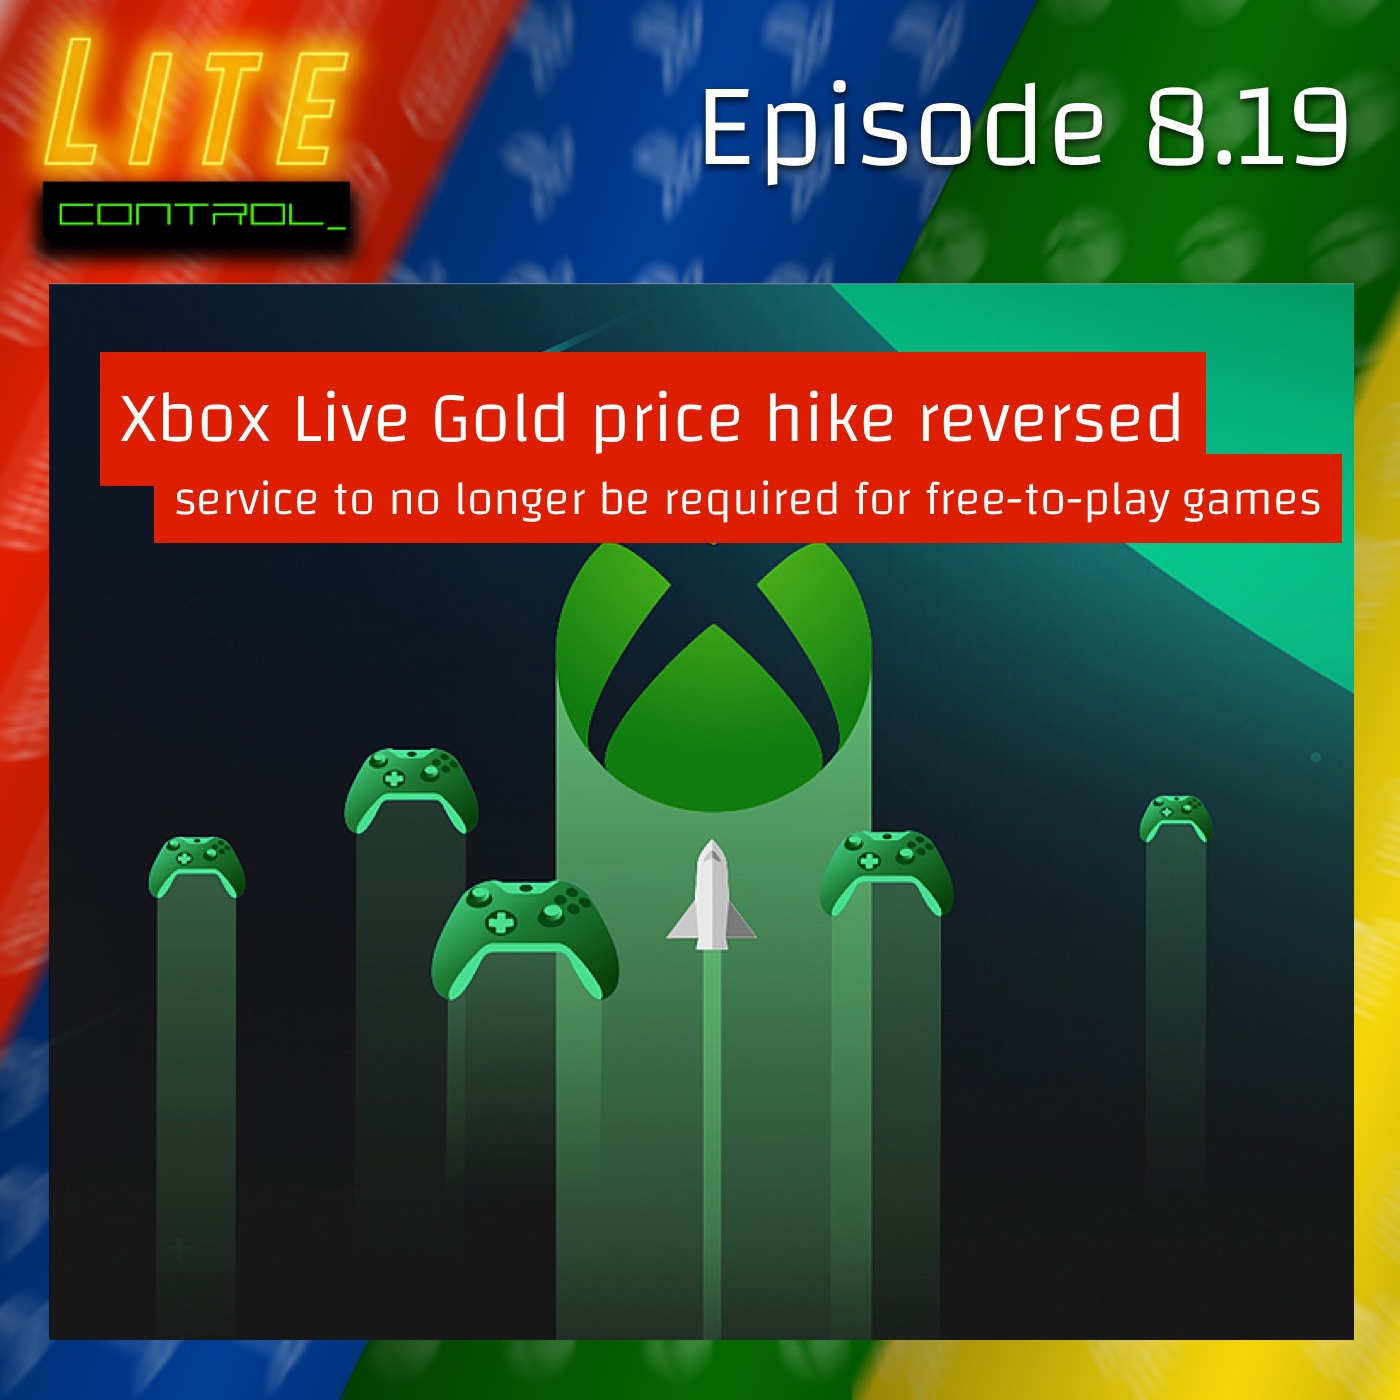 Lite Control 8.19 - Xbox Live Gold Price Hike Backfires Bigtime